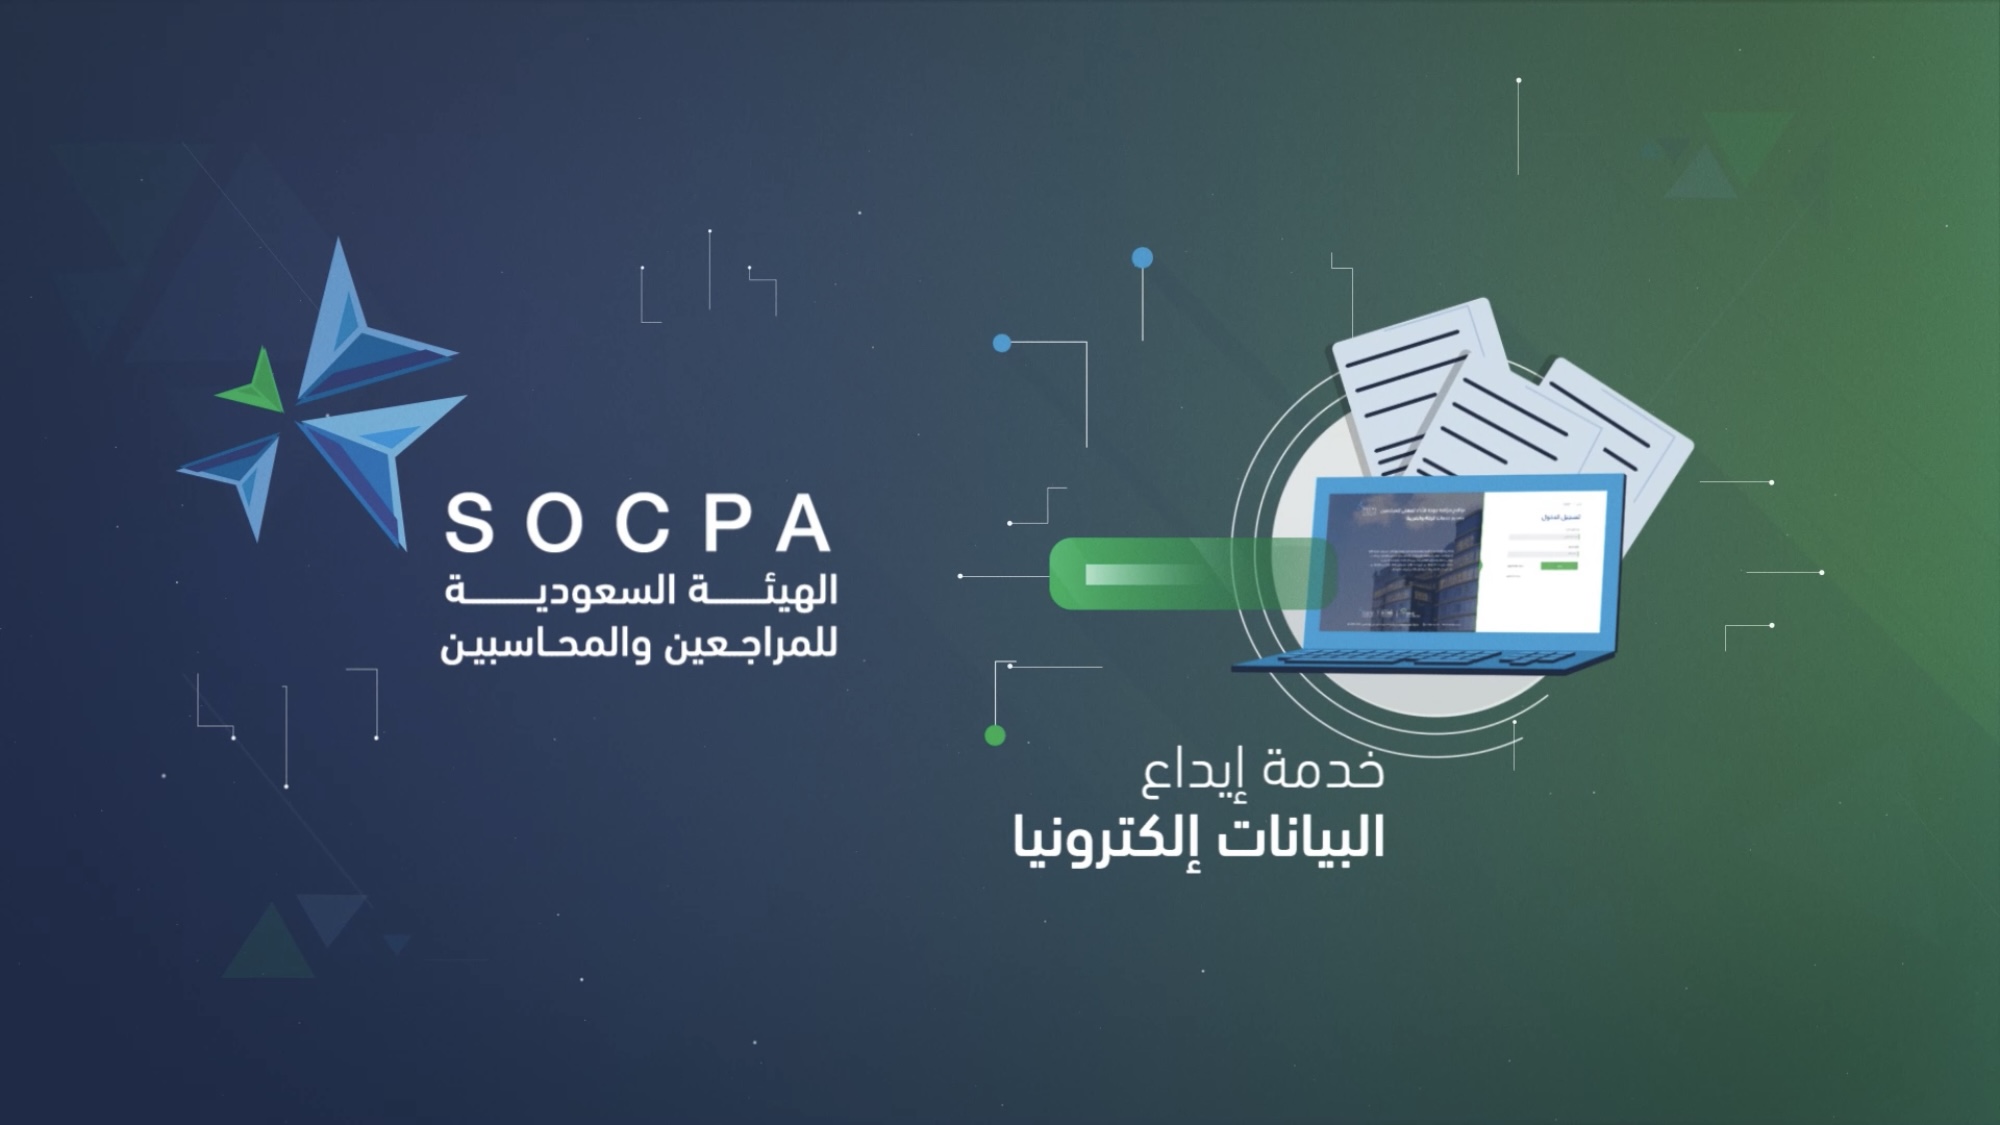 SOCPA Launches the “Electronic Data Upload” Service